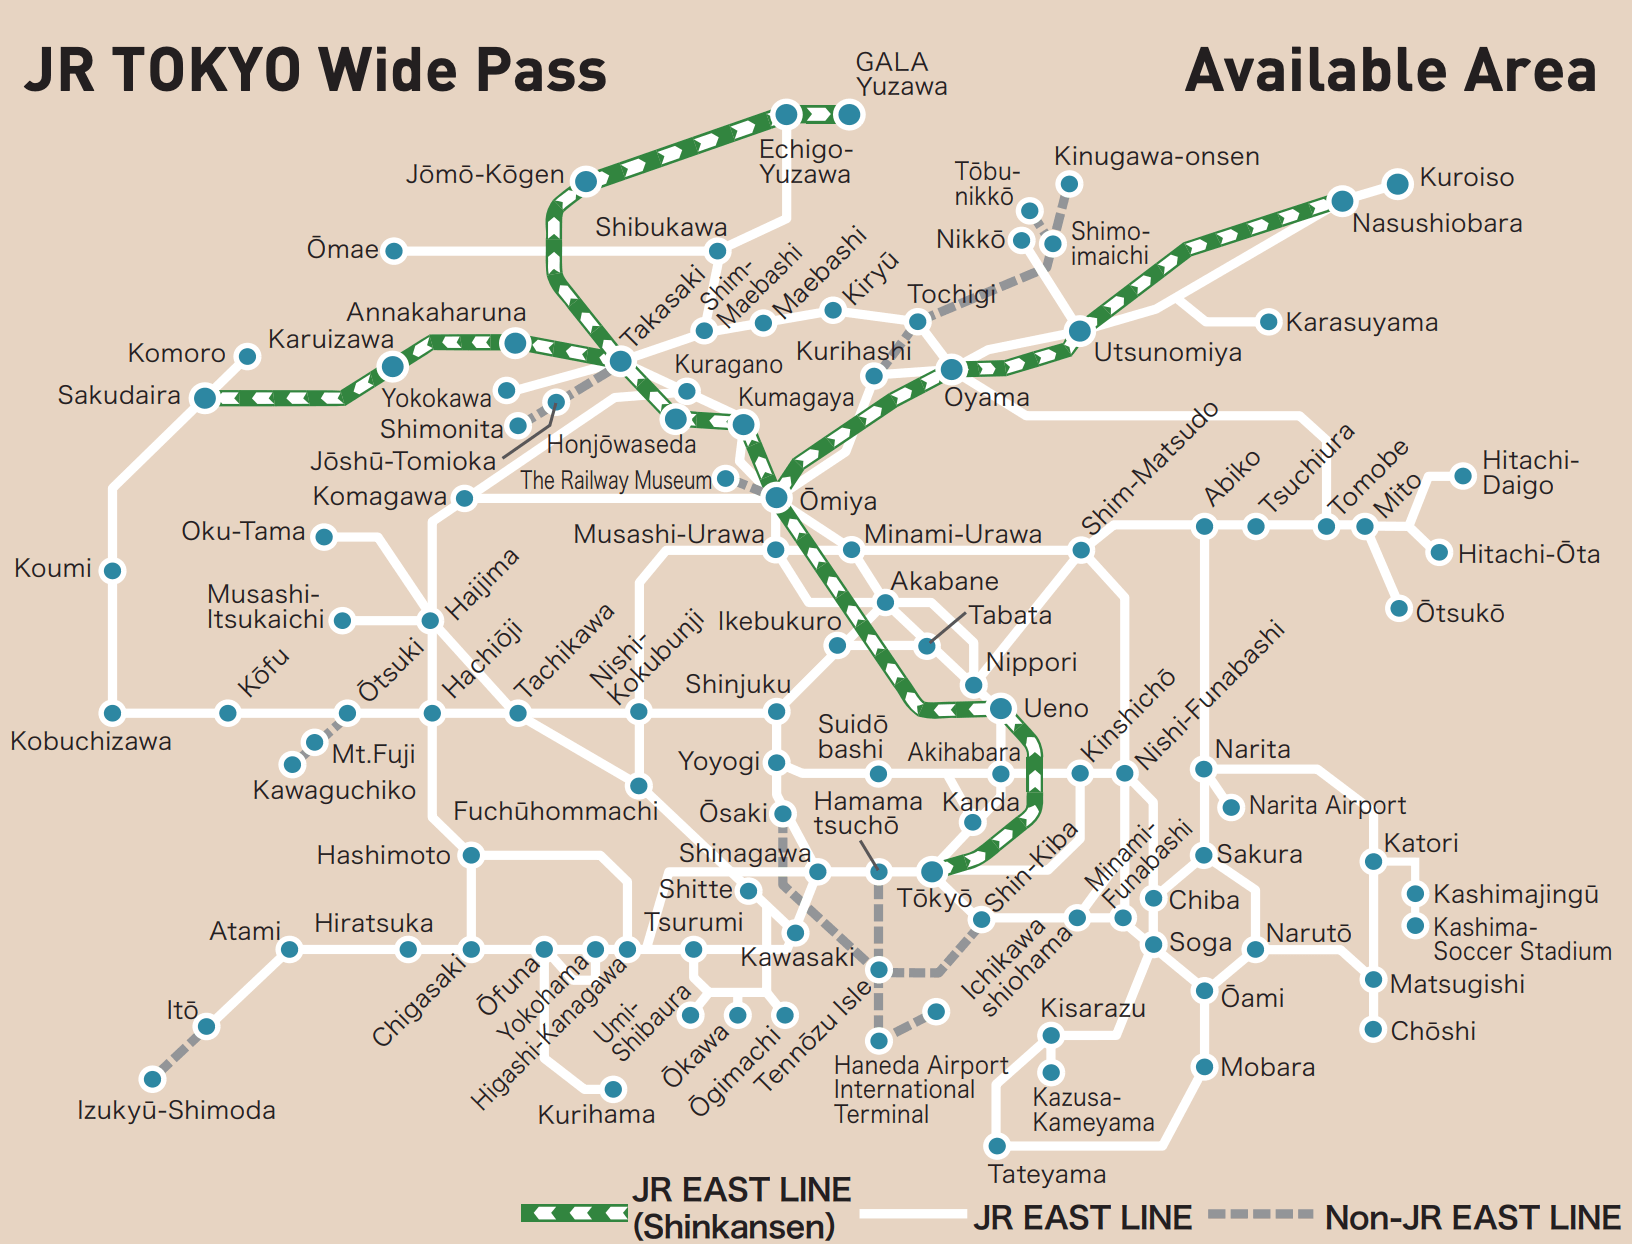 JR TOKYO Wide Pass coverage map